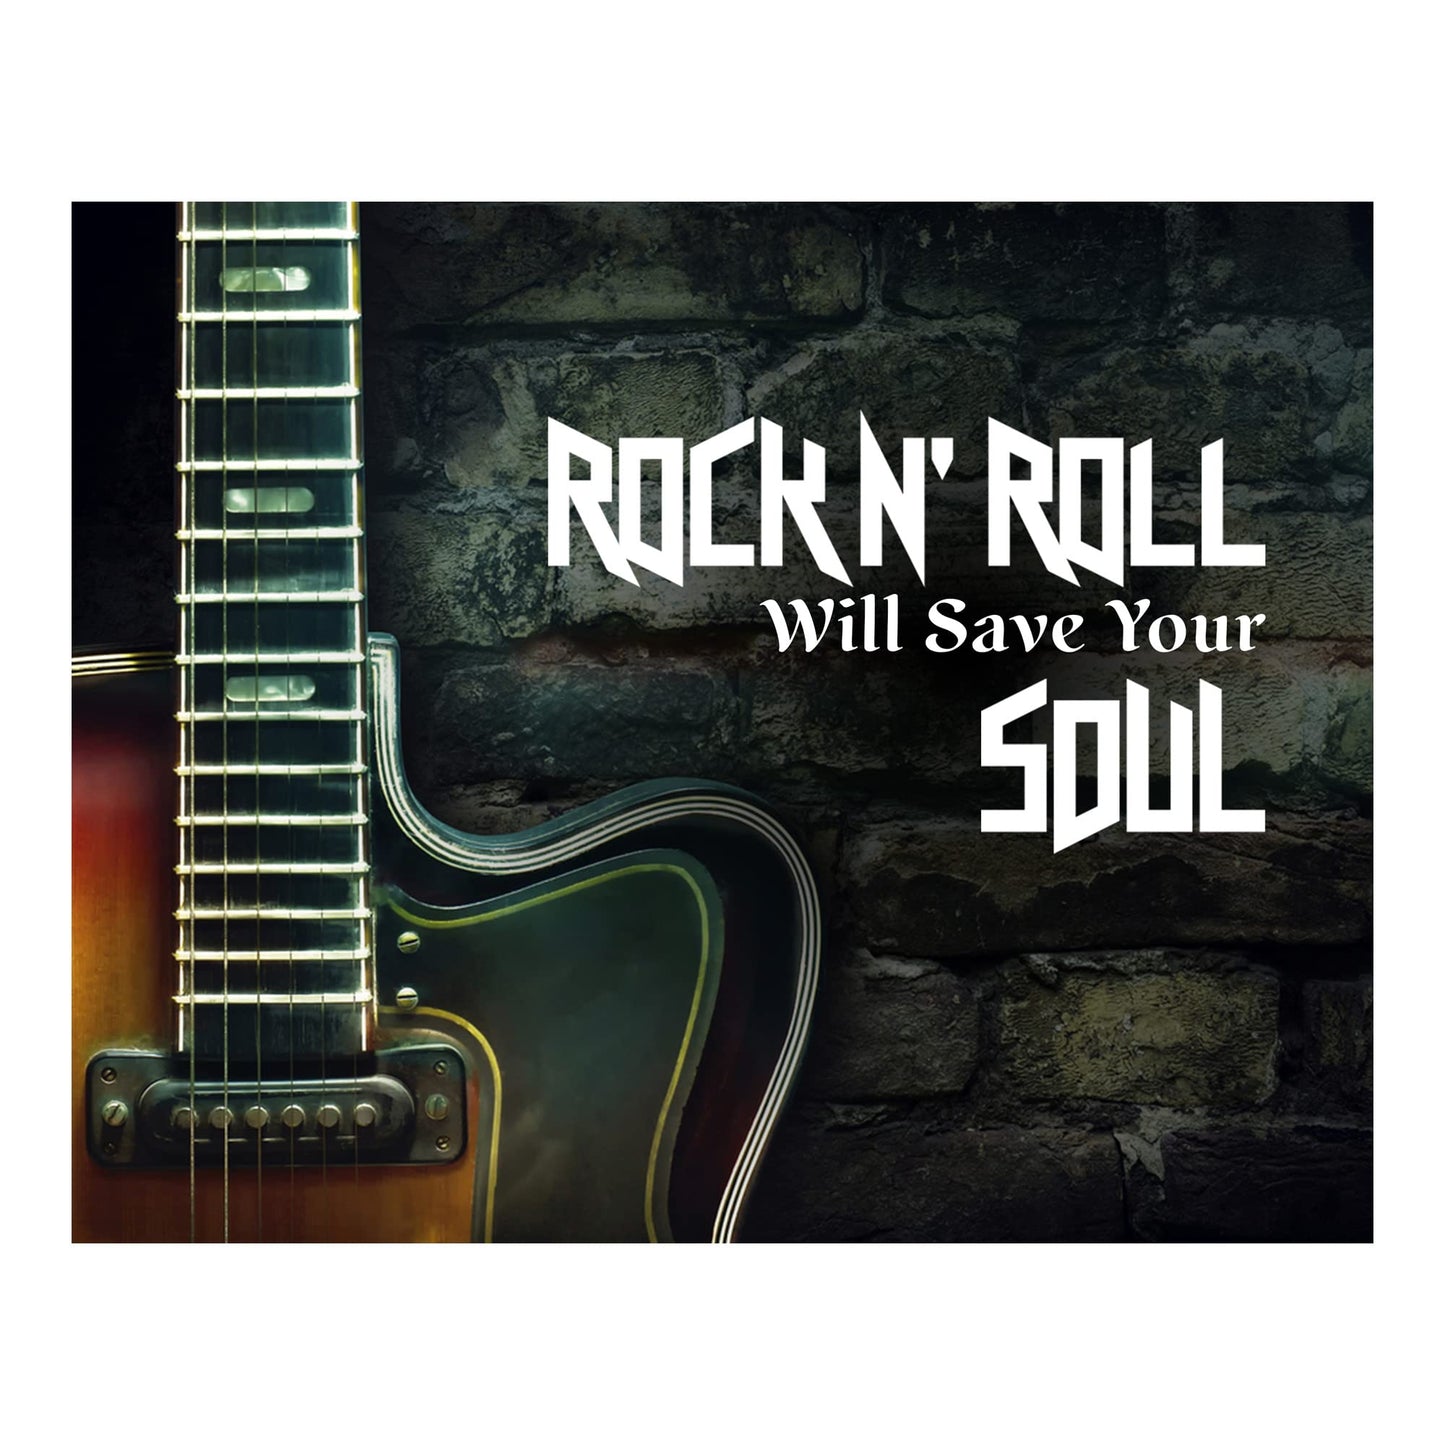 Rock N' Roll - Vintage Music Wall Art Poster, This Ready to Frame Retro Guitar Photo Rock Music Wall Art Print Good For Home, Studio, Rock Band Decor, And Man Cave Room Decor, Unframed - 8x10"